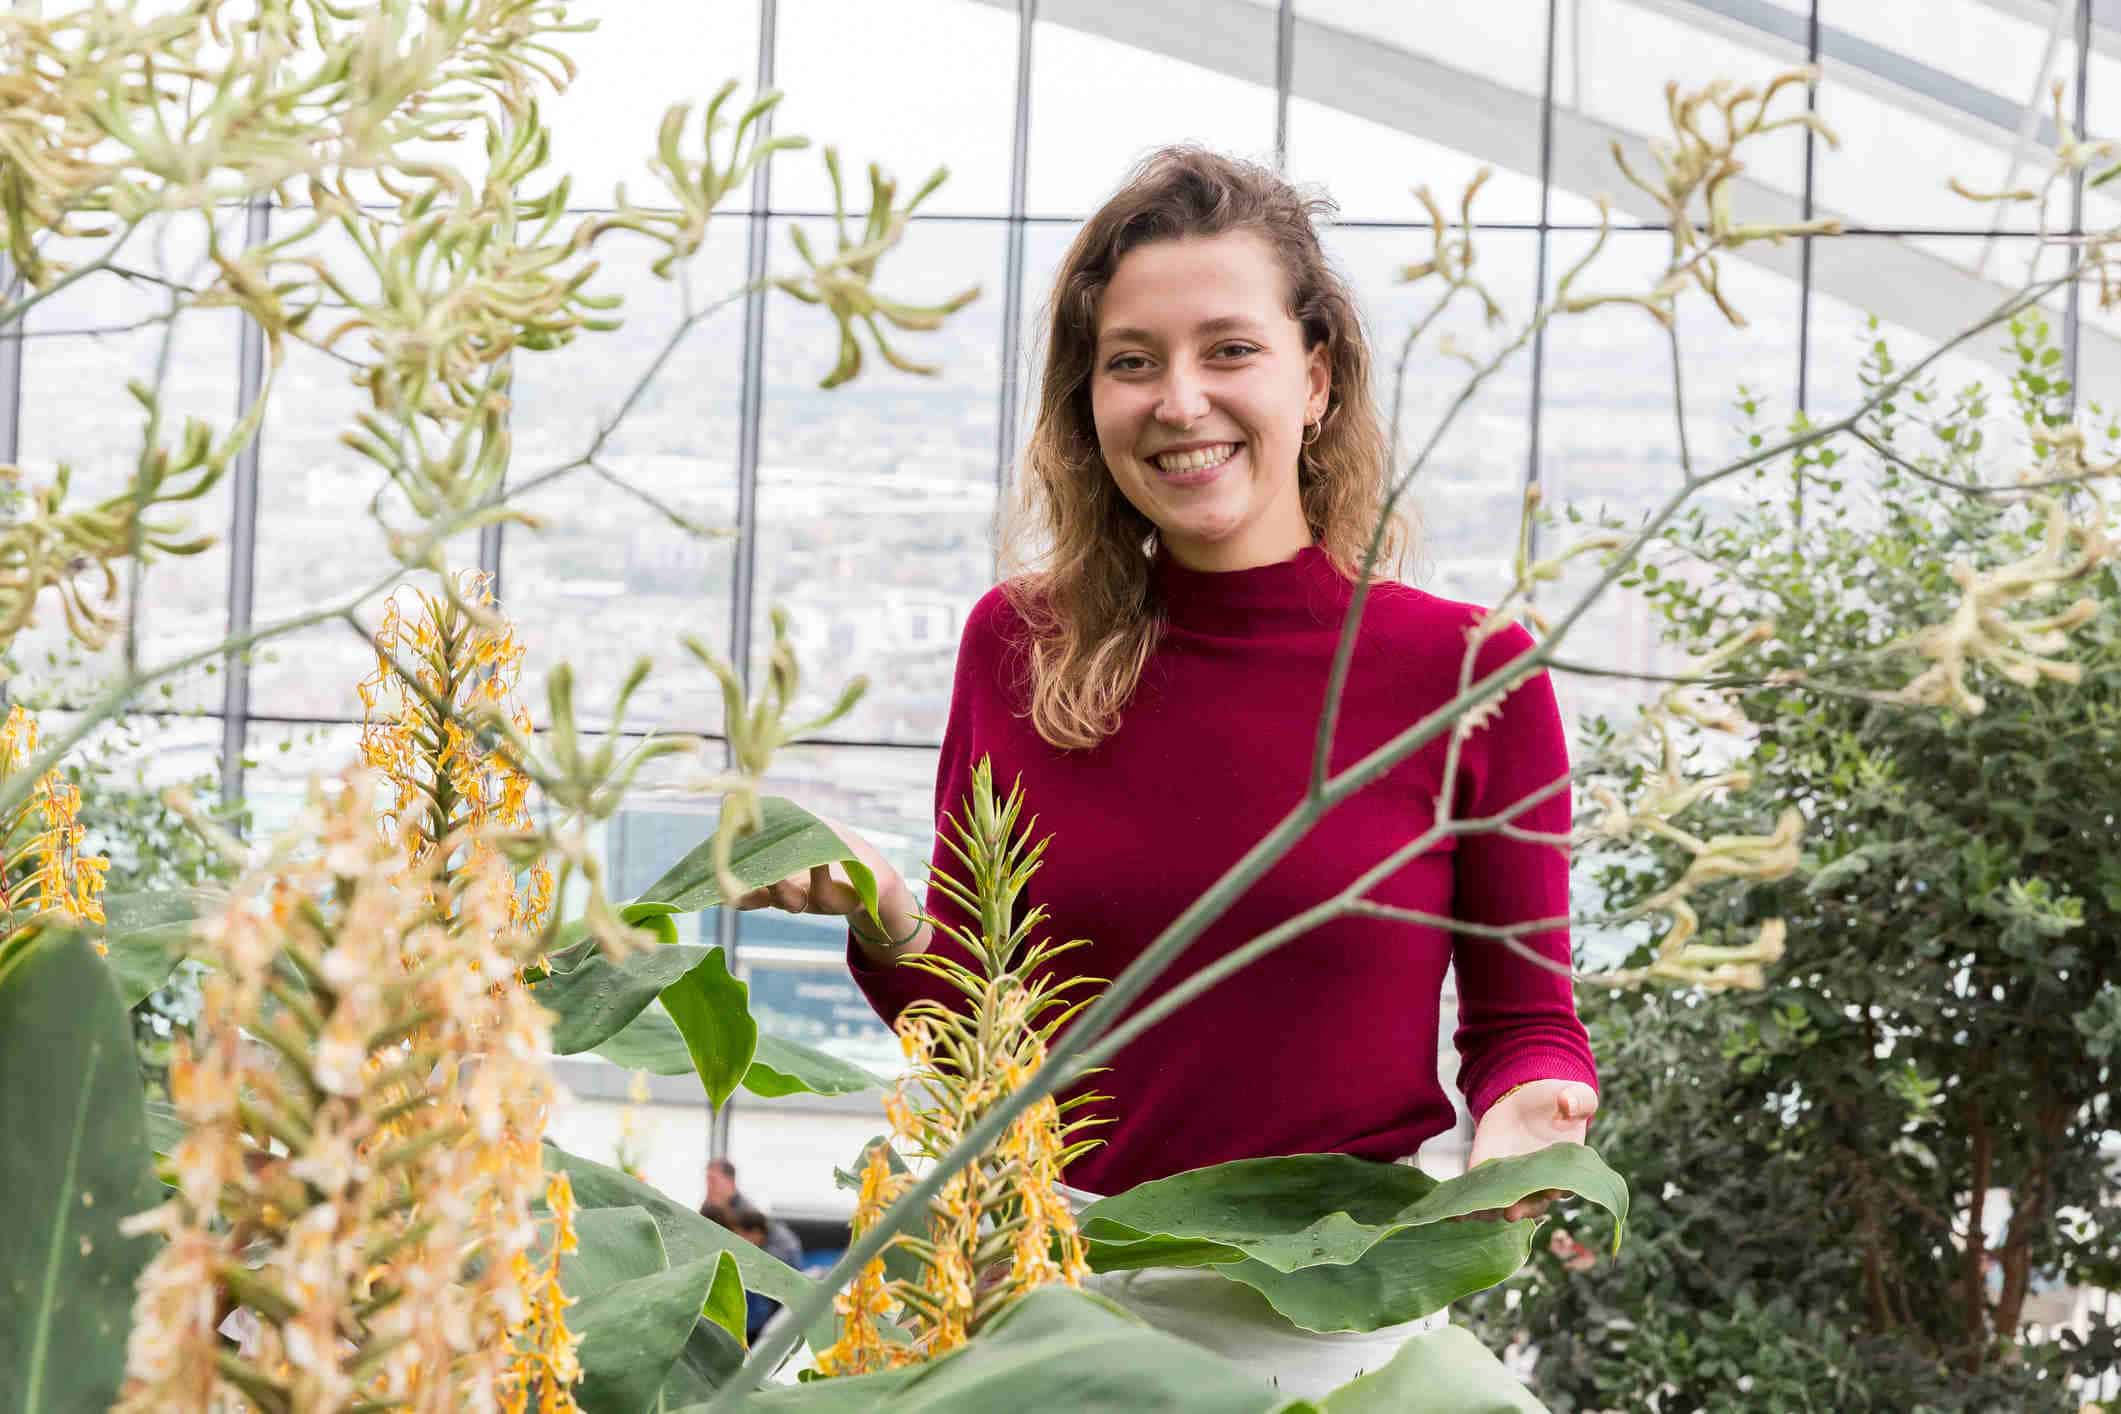 A white woman with medium length brown hair is standing behind some plants. She wears a red turtle neck jumper and behind her is a giant glass window.